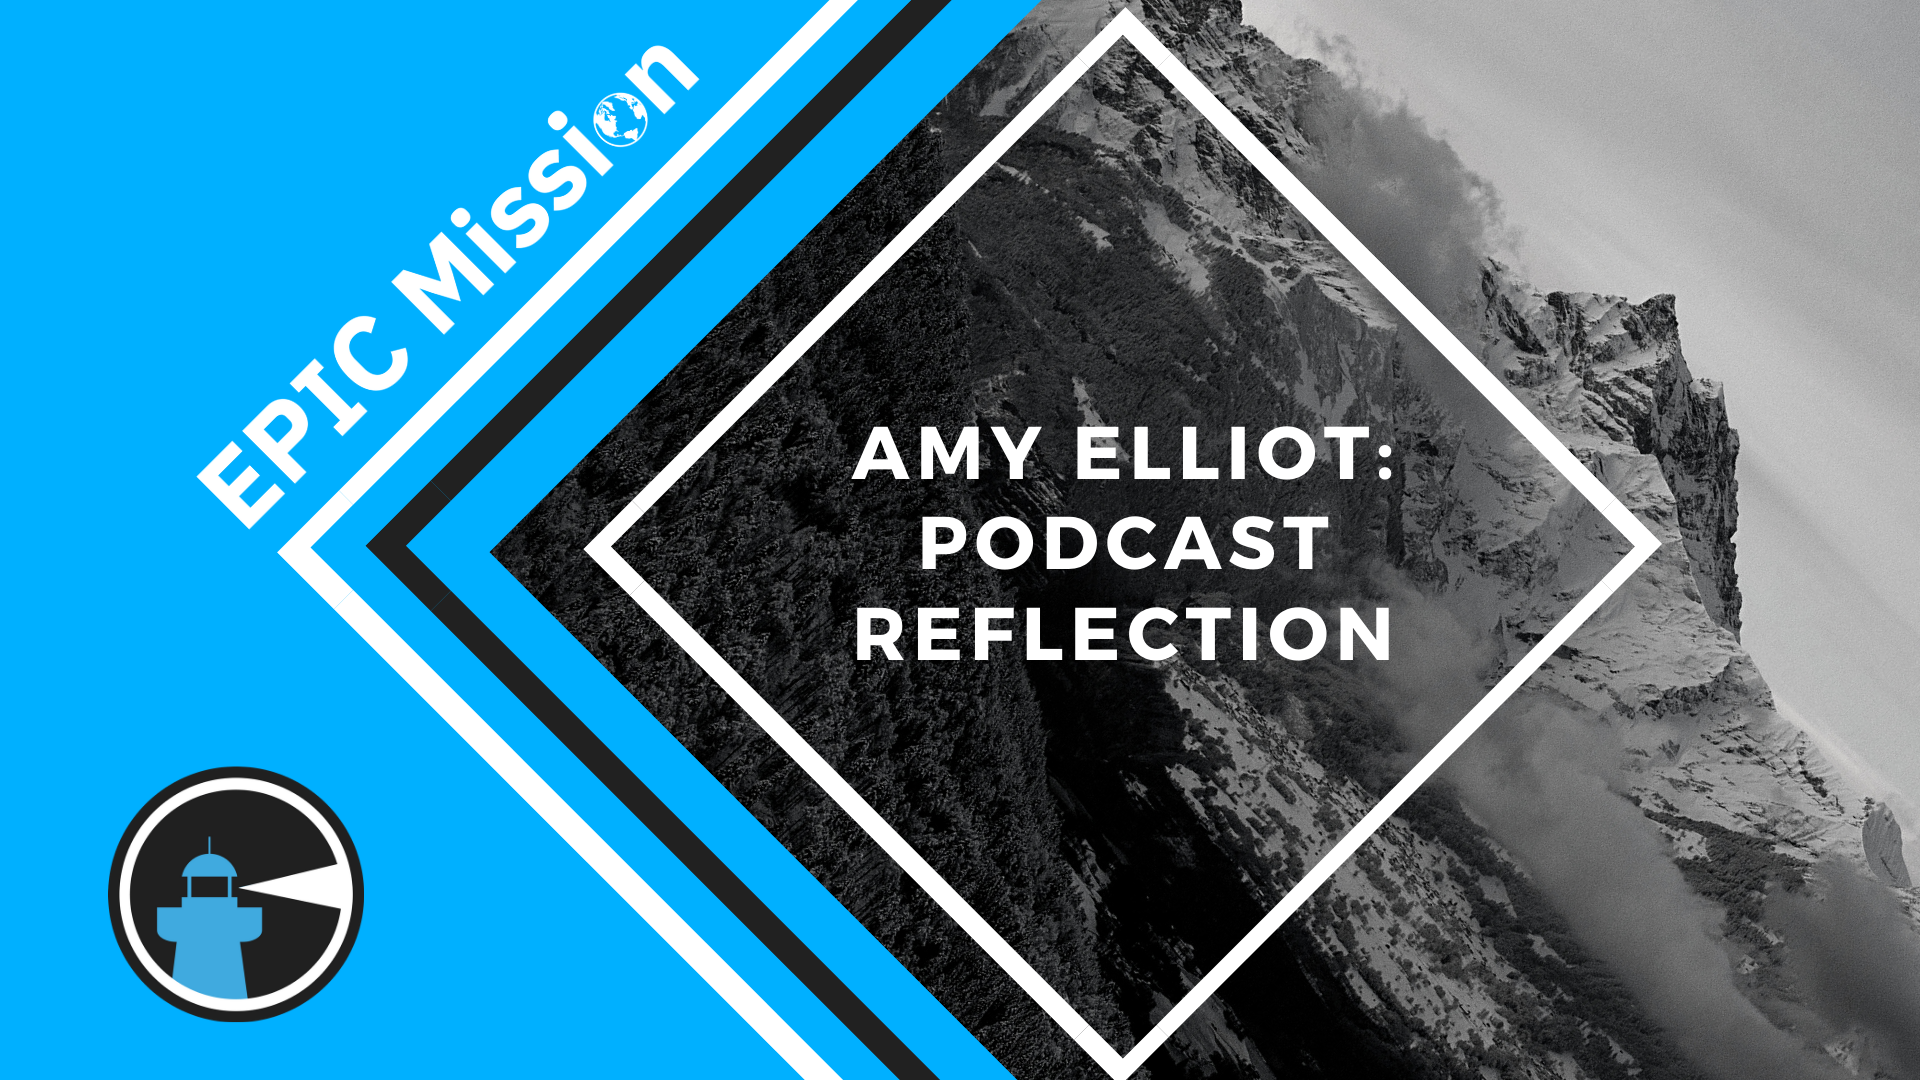 Amy Elliot: Podcast Reflection - Heroes of Change - Epic Mission Blog